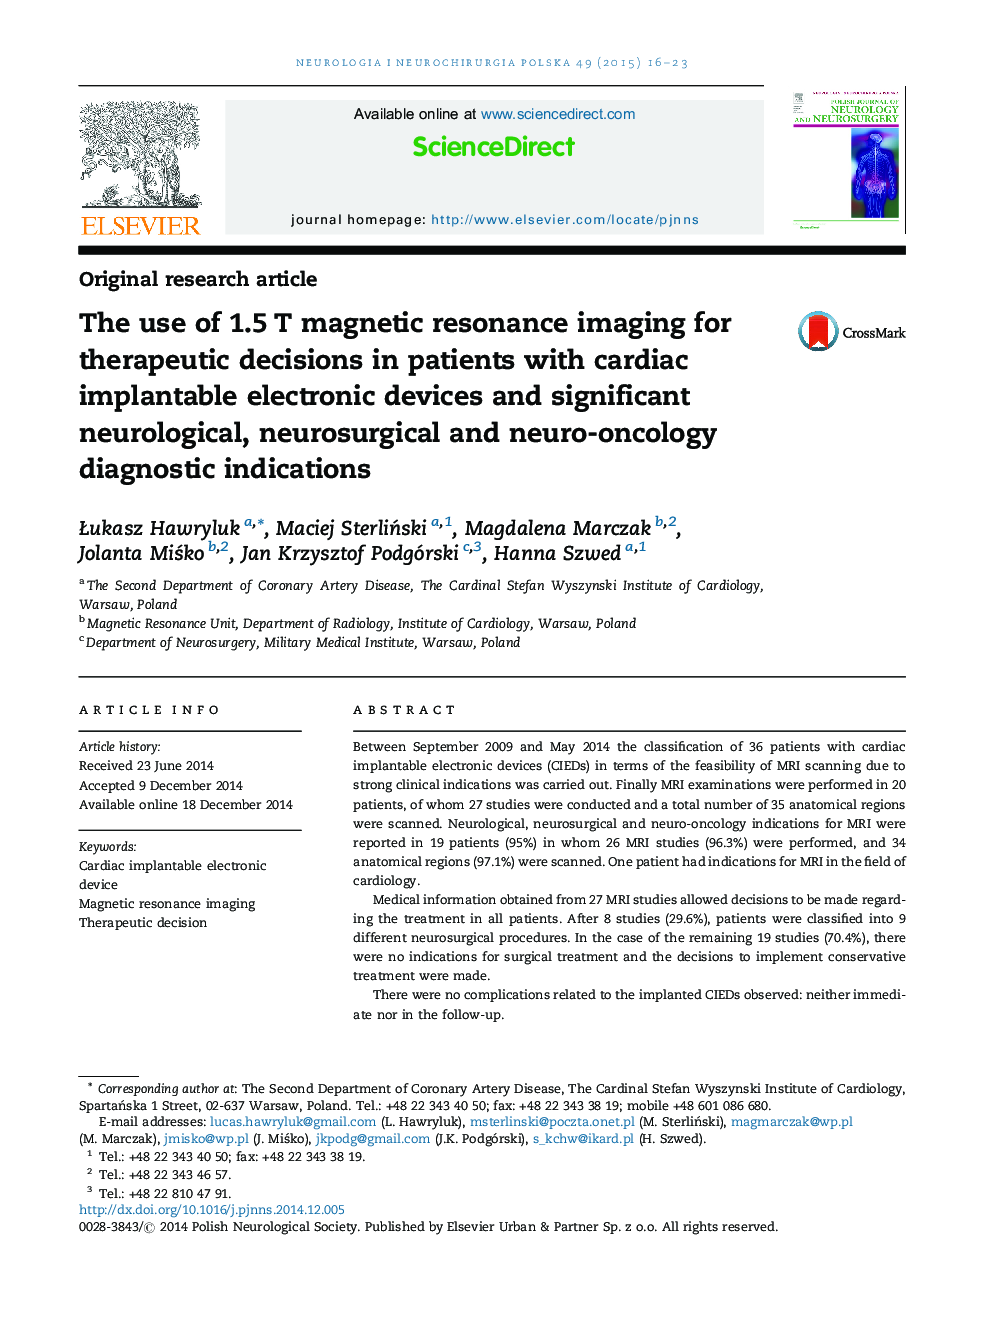 The use of 1.5 T magnetic resonance imaging for therapeutic decisions in patients with cardiac implantable electronic devices and significant neurological, neurosurgical and neuro-oncology diagnostic indications